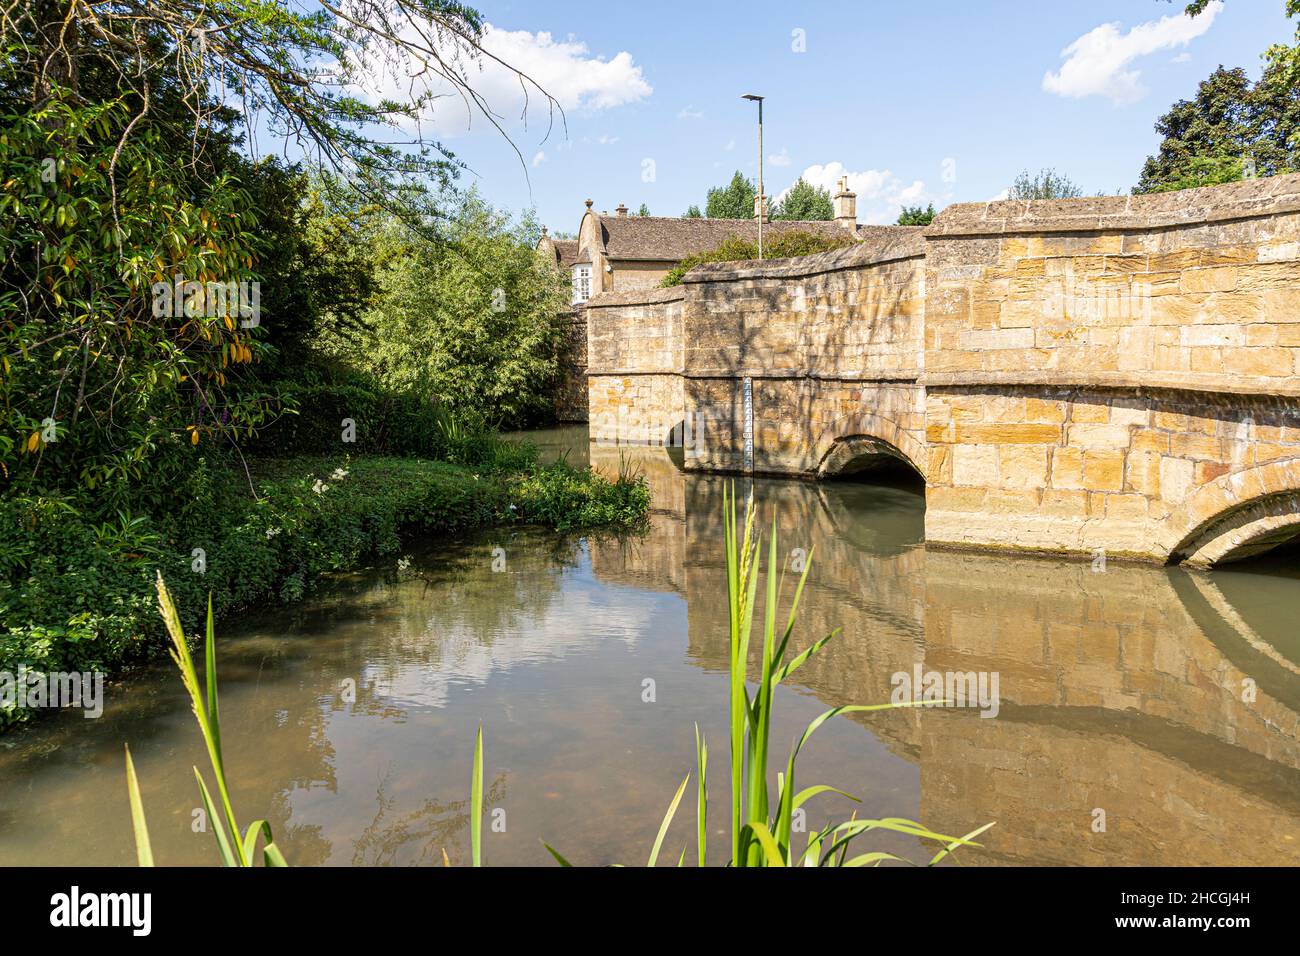 The River Windrush flowing under the old stone bridge in the Cotswold town of Burford, Oxfordshire UK Stock Photo